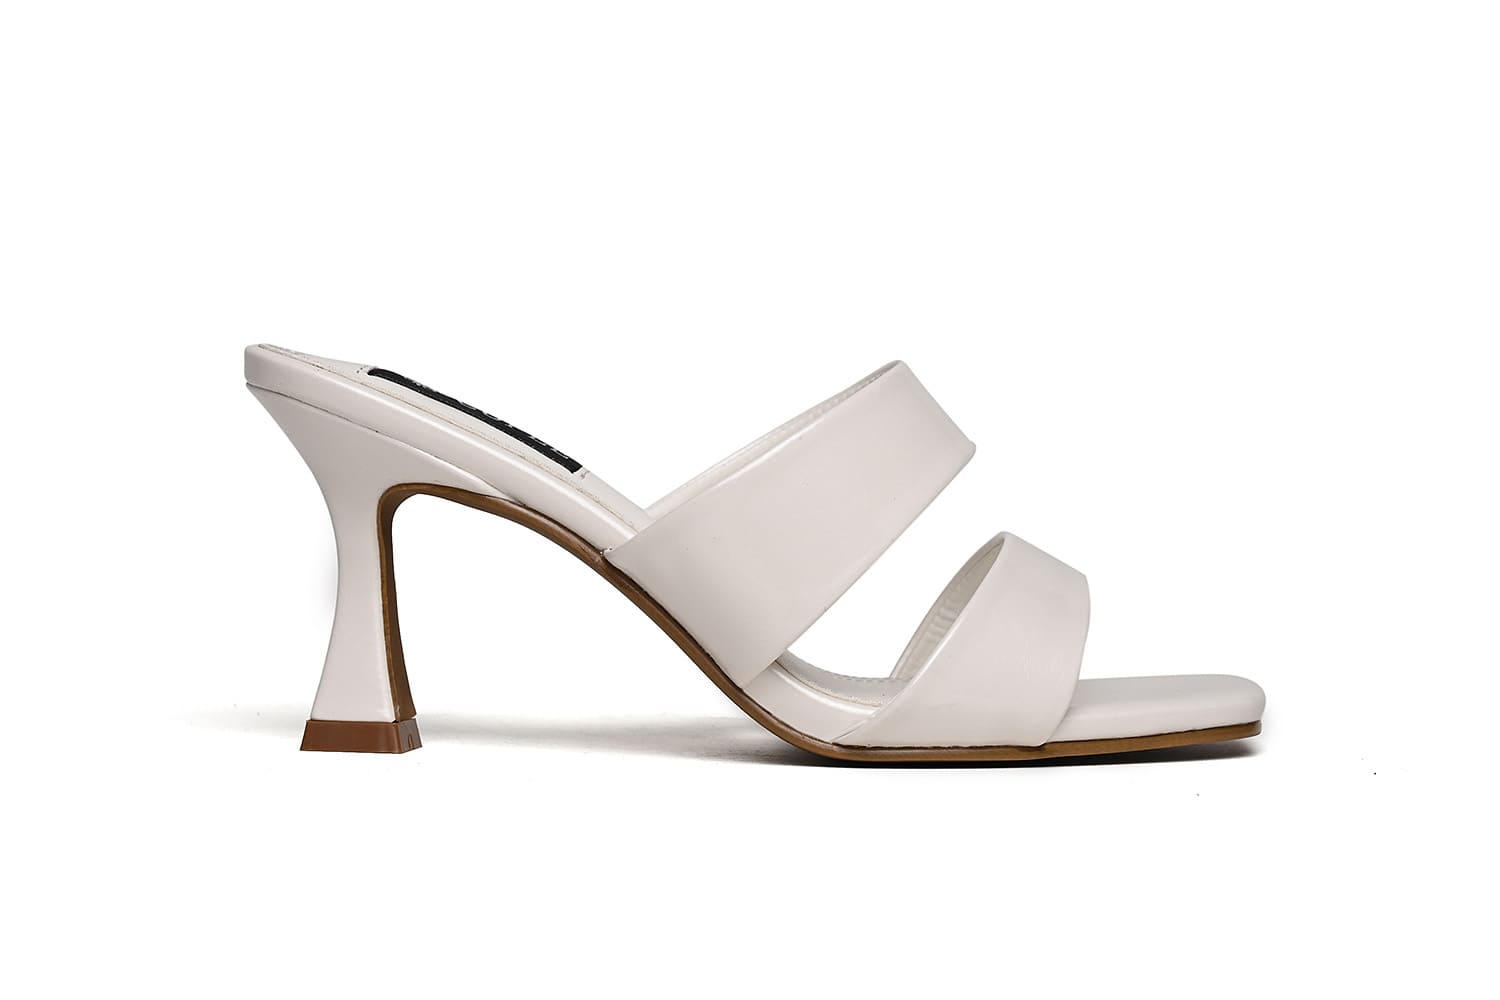 CUPLE – Open shoes with a short heel made of glossy white leather in a ...